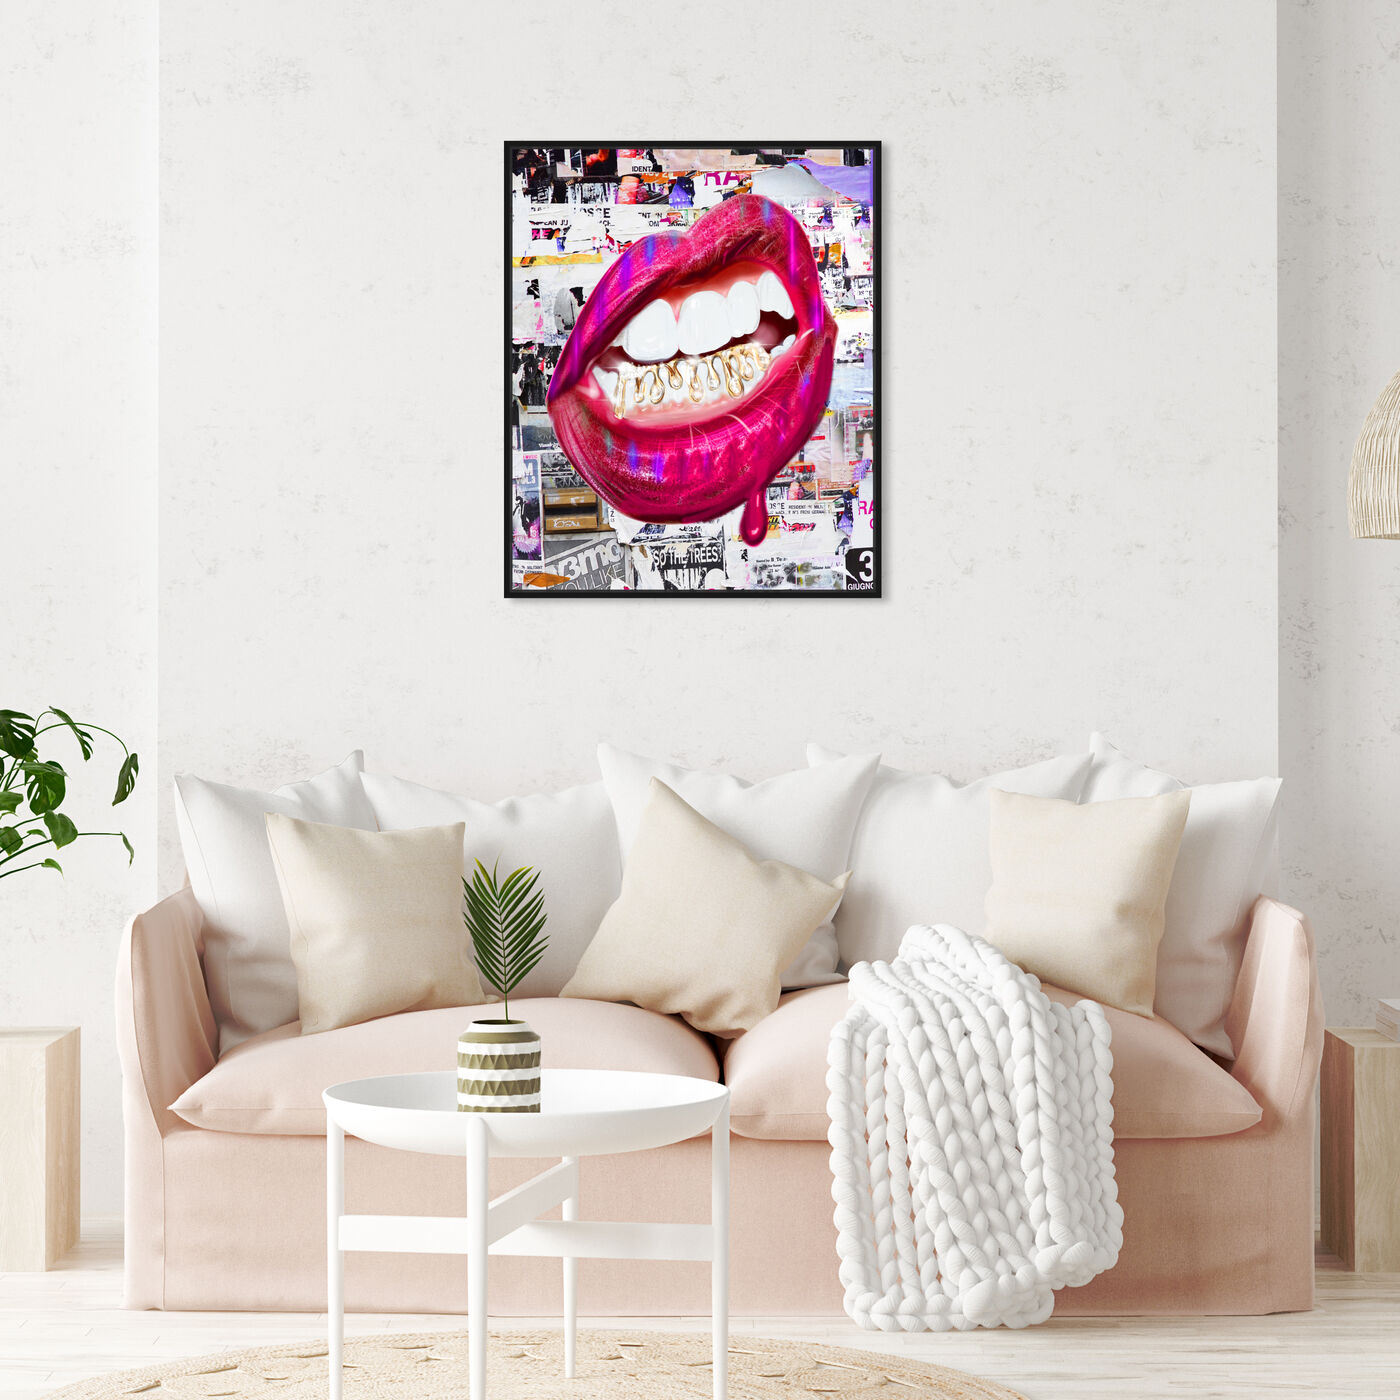 Hanging view of Savage featuring fashion and glam and lips art.